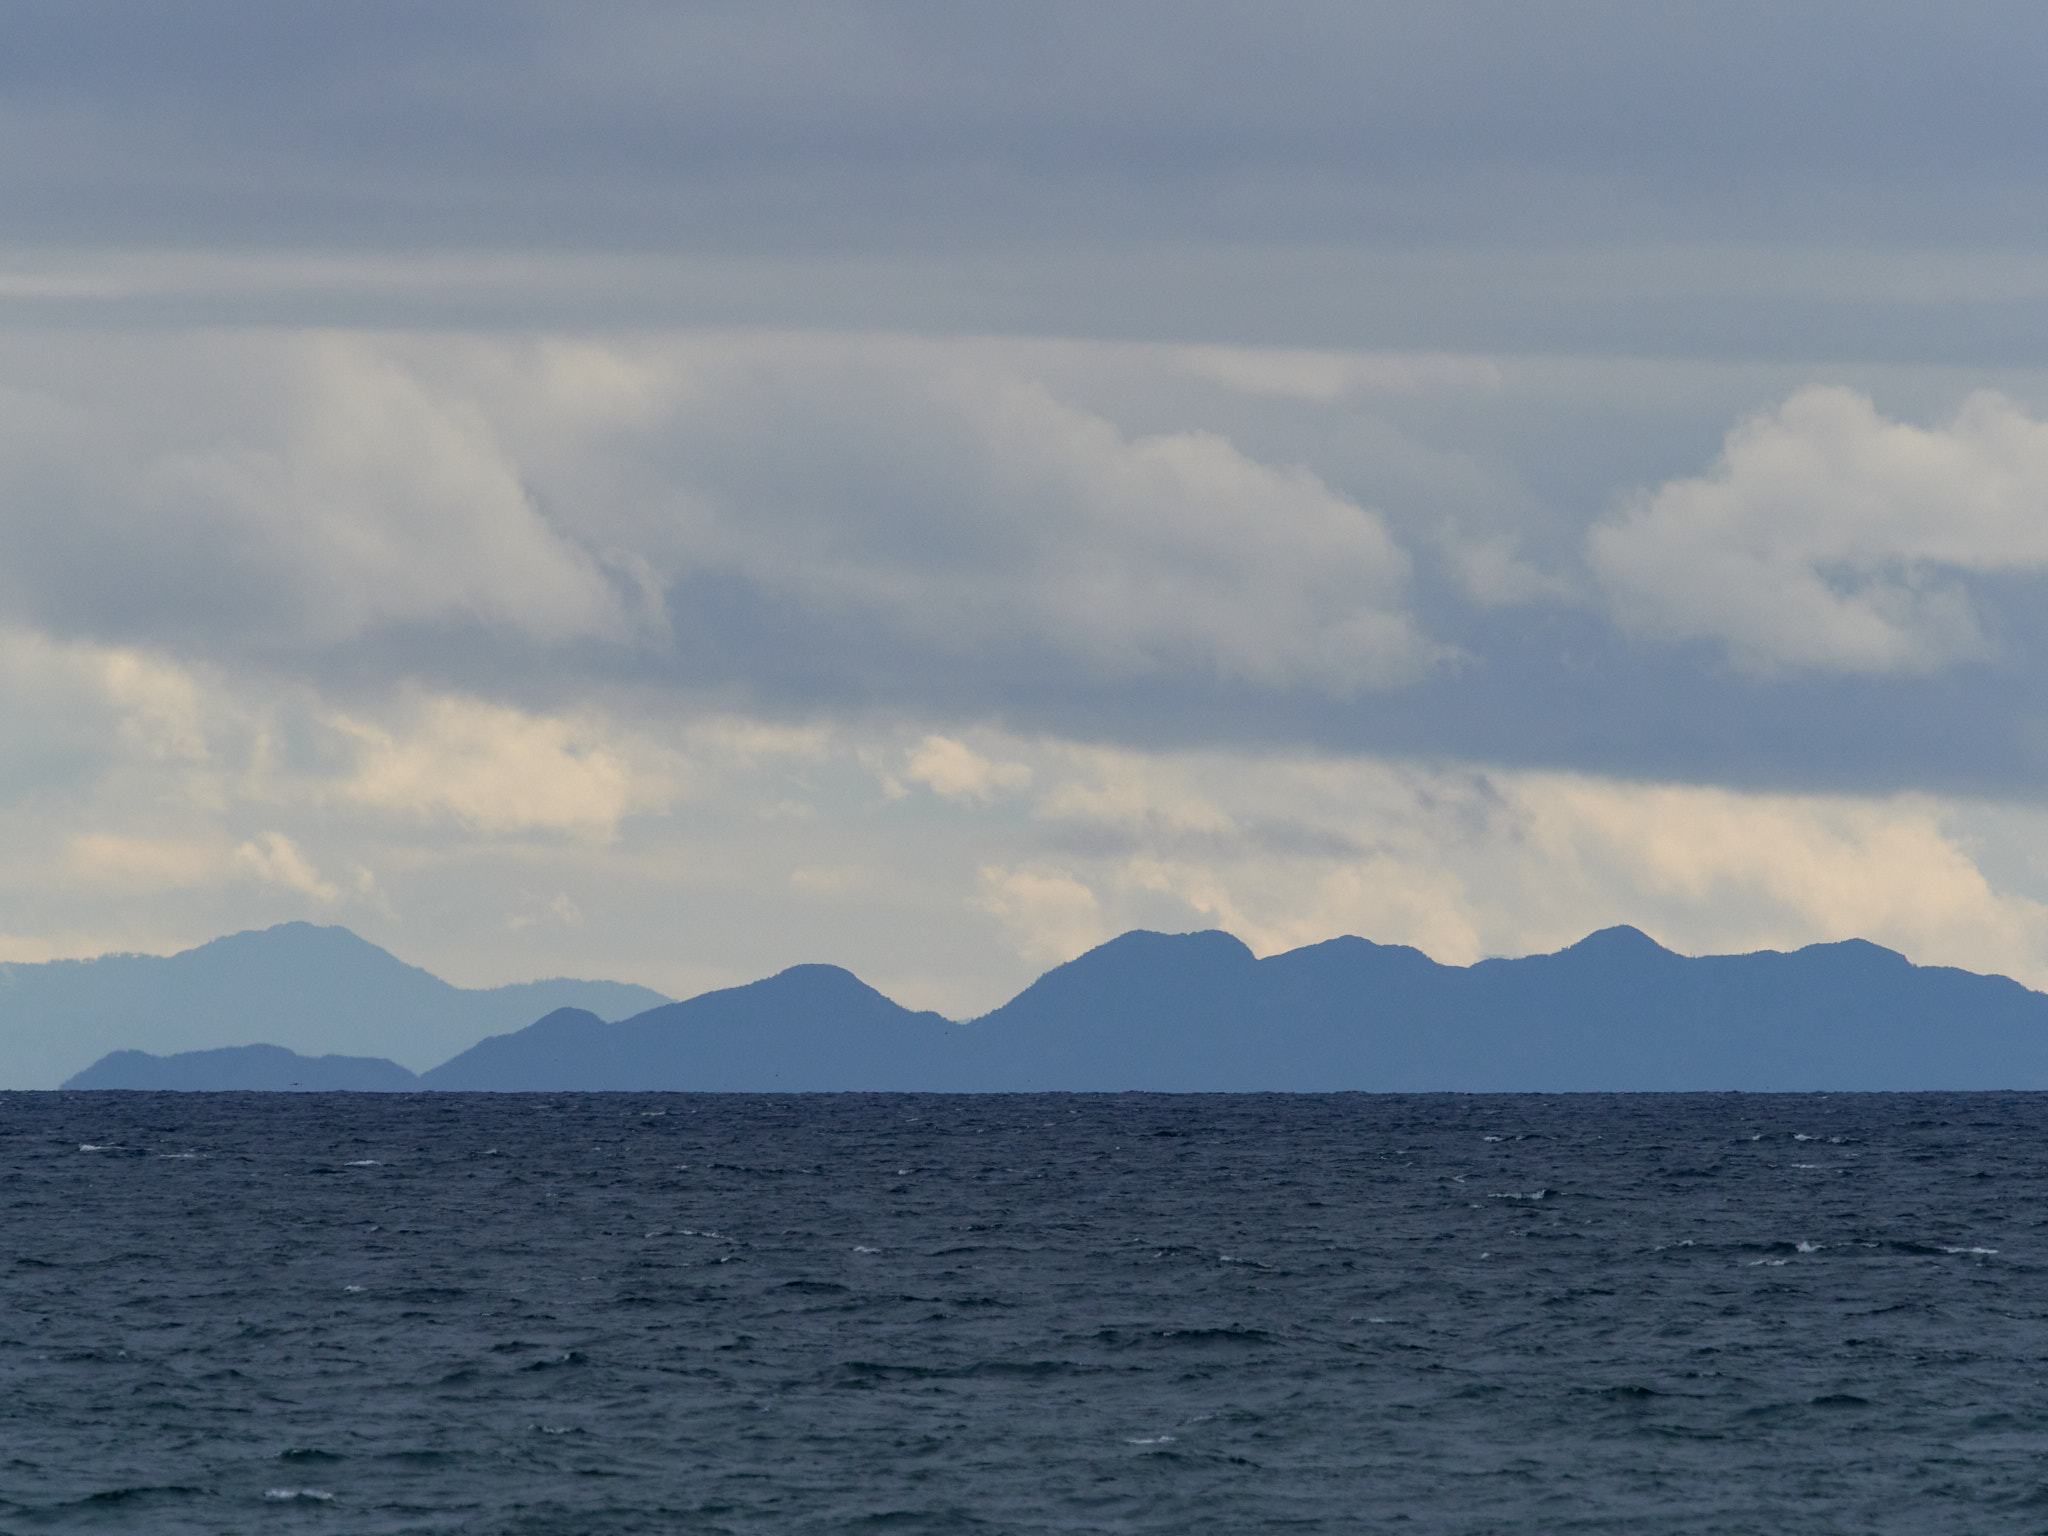 Looking northward, towards the next closest islands...